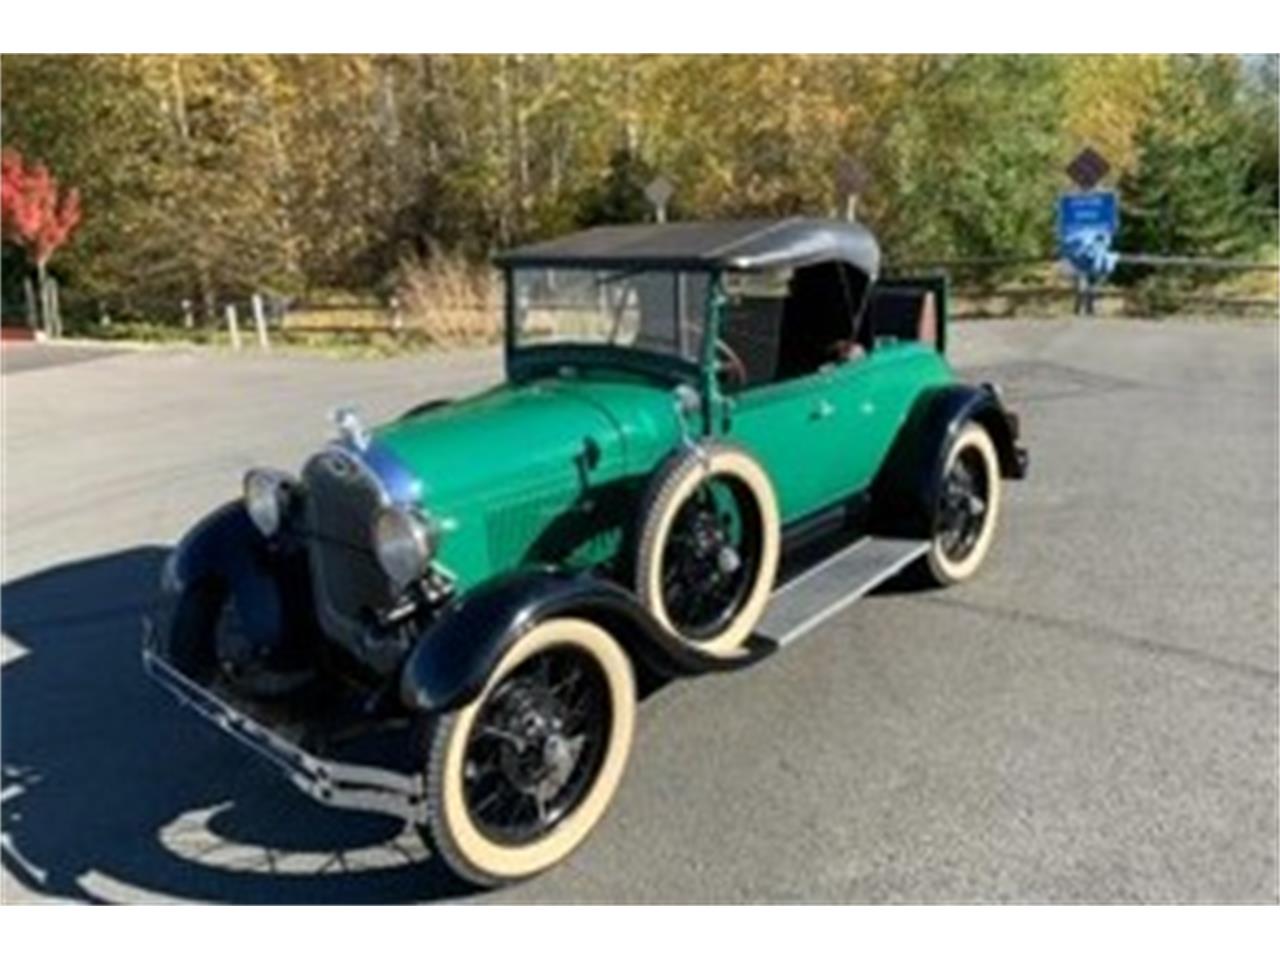 For Sale at Auction: 1928 Ford Model A in Palm Springs, California for sale in Palm Springs, CA